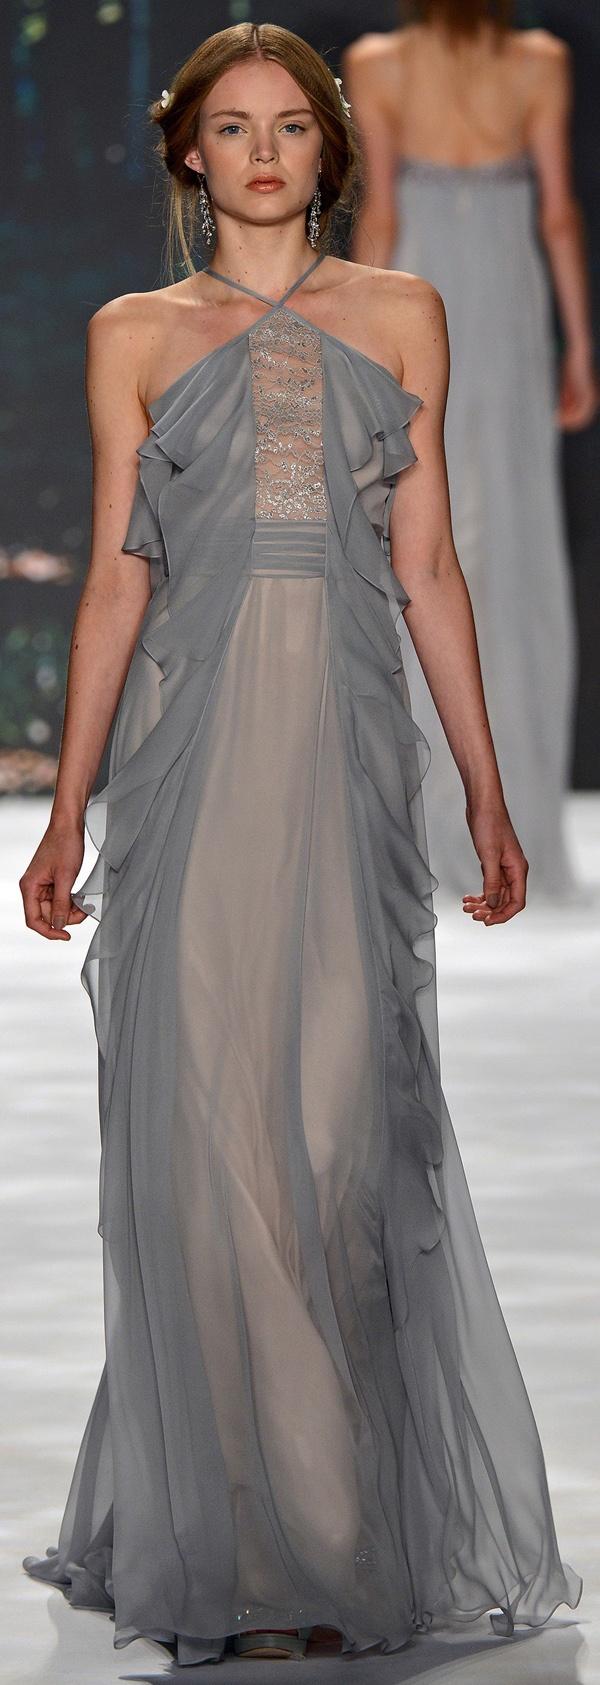 Wedding - Badgley Mischka Spring 2013 Ready-to-Wear Fashion Show: Complete Collection